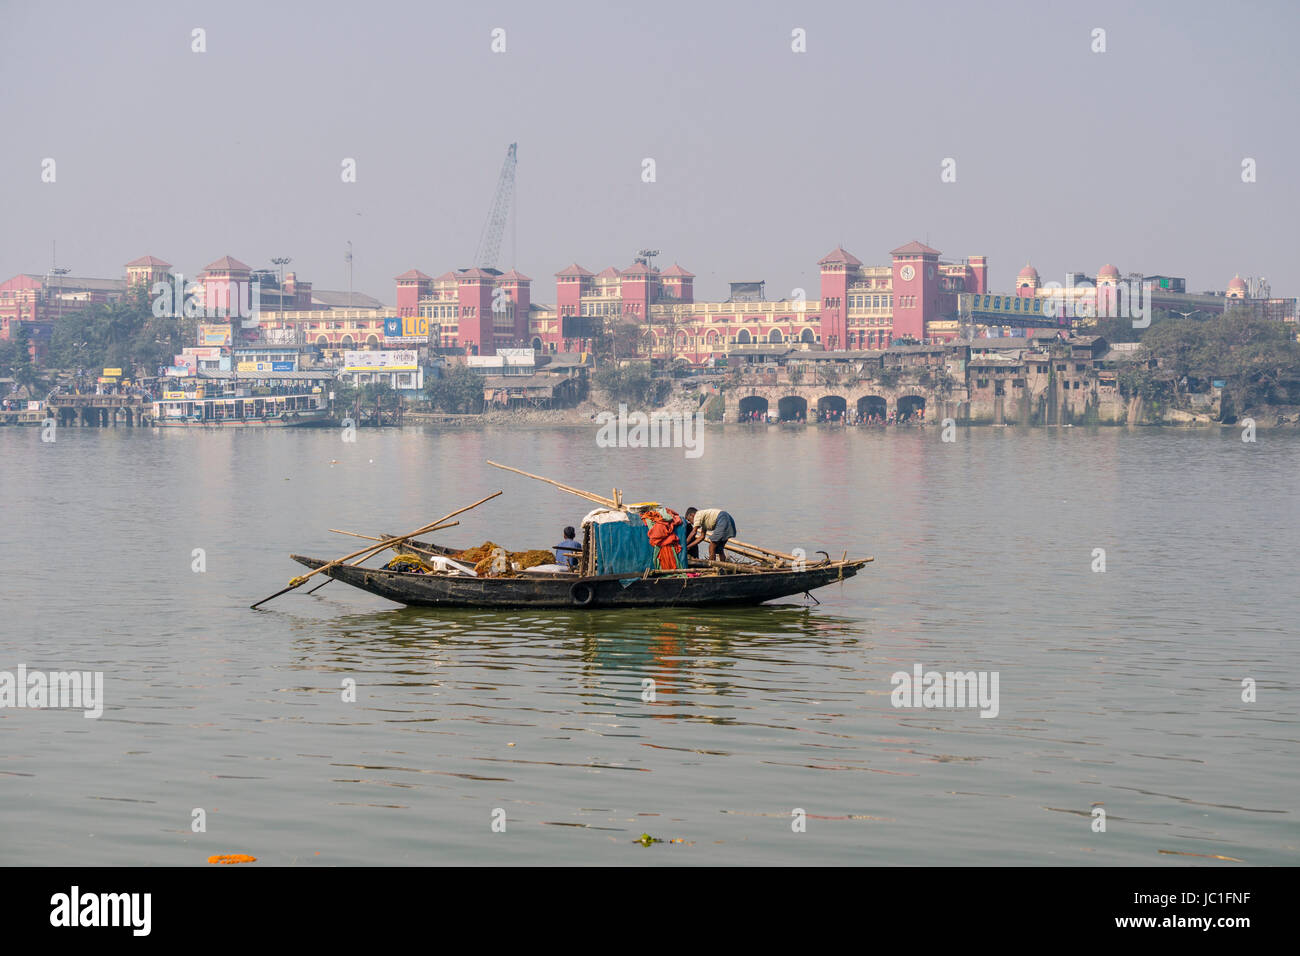 A fishermans boat is crossing the Hoogli River, Howrah Railway Station in the distance Stock Photo